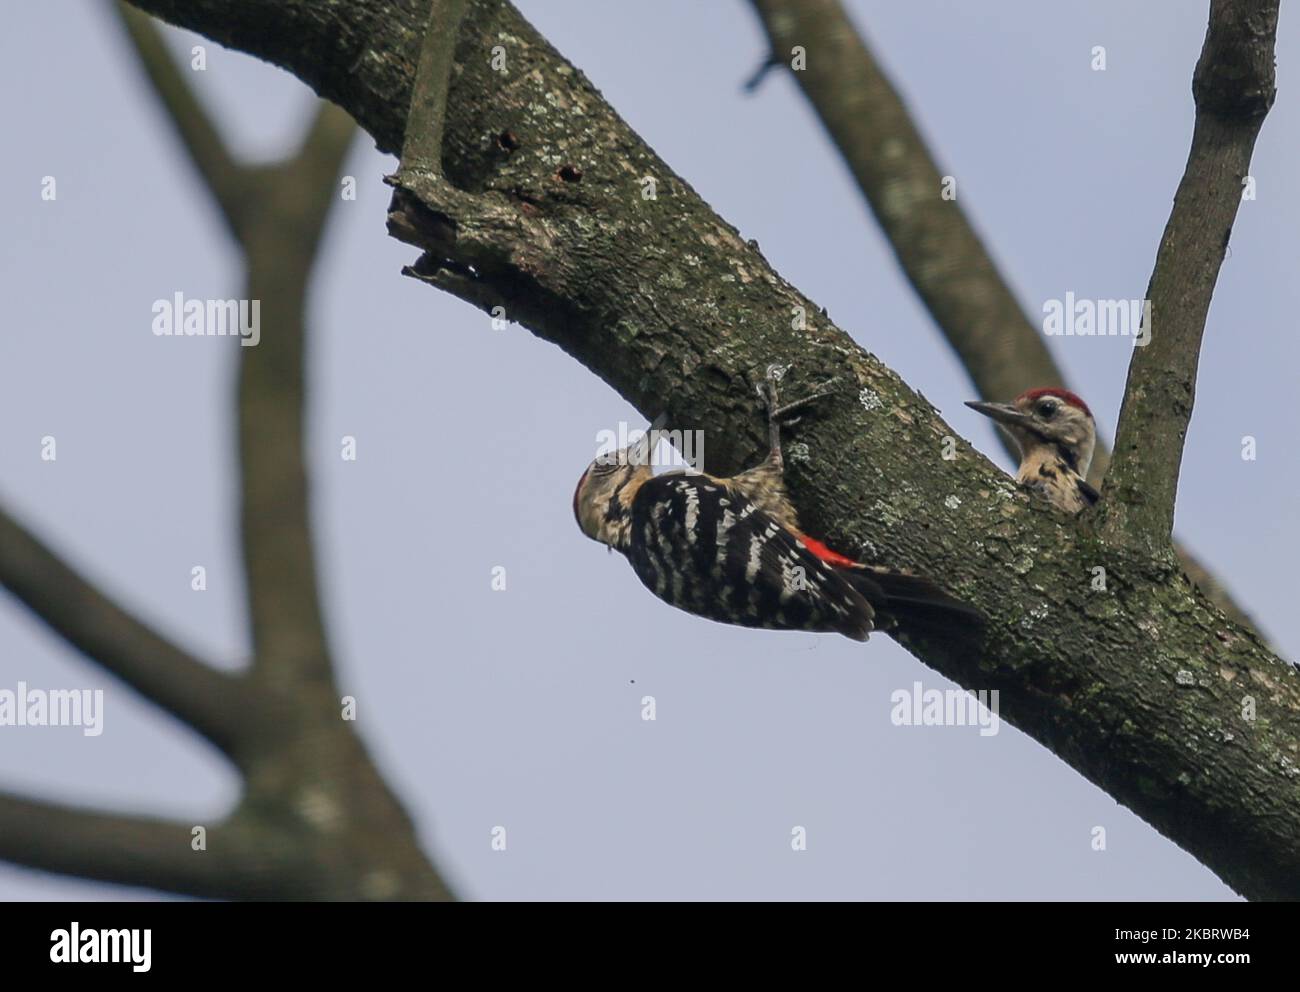 Fulvous-breasted woodpecker is seen on a tree at the village on the outskirts of Kathmandu, Nepal on June 29, 2020. Fulvous-breasted woodpecker is a species of bird in the family Picidae. It is found in Nepal, India, Bangladesh, Bhutan, and Myanmar. (Photo by Sunil Pradhan/NurPhoto) Stock Photo